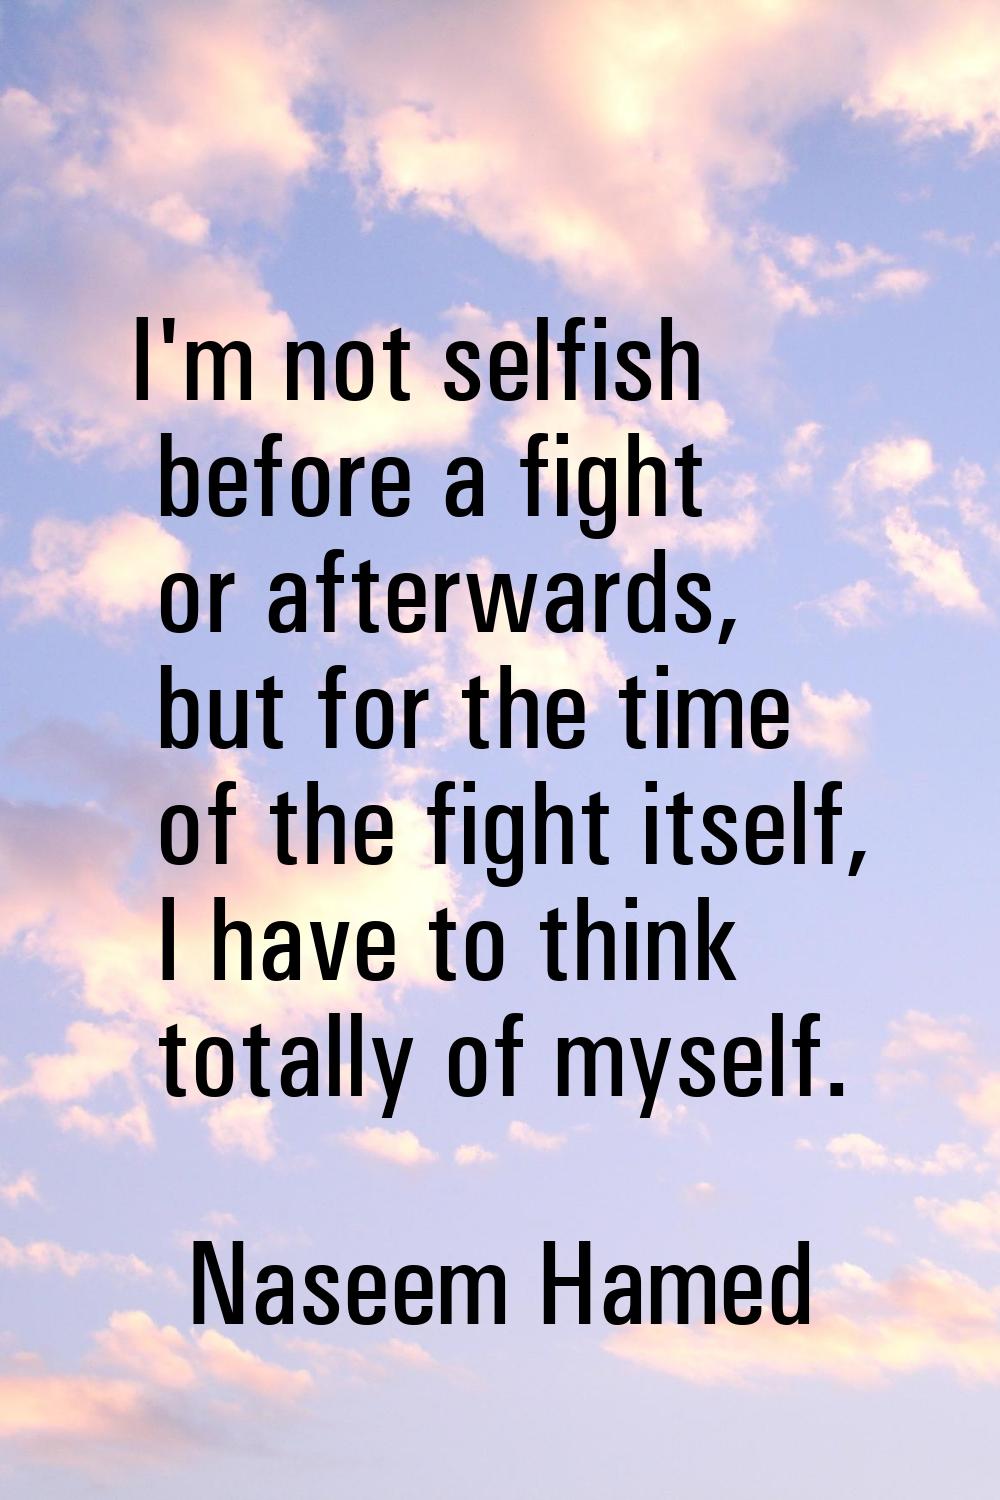 I'm not selfish before a fight or afterwards, but for the time of the fight itself, I have to think